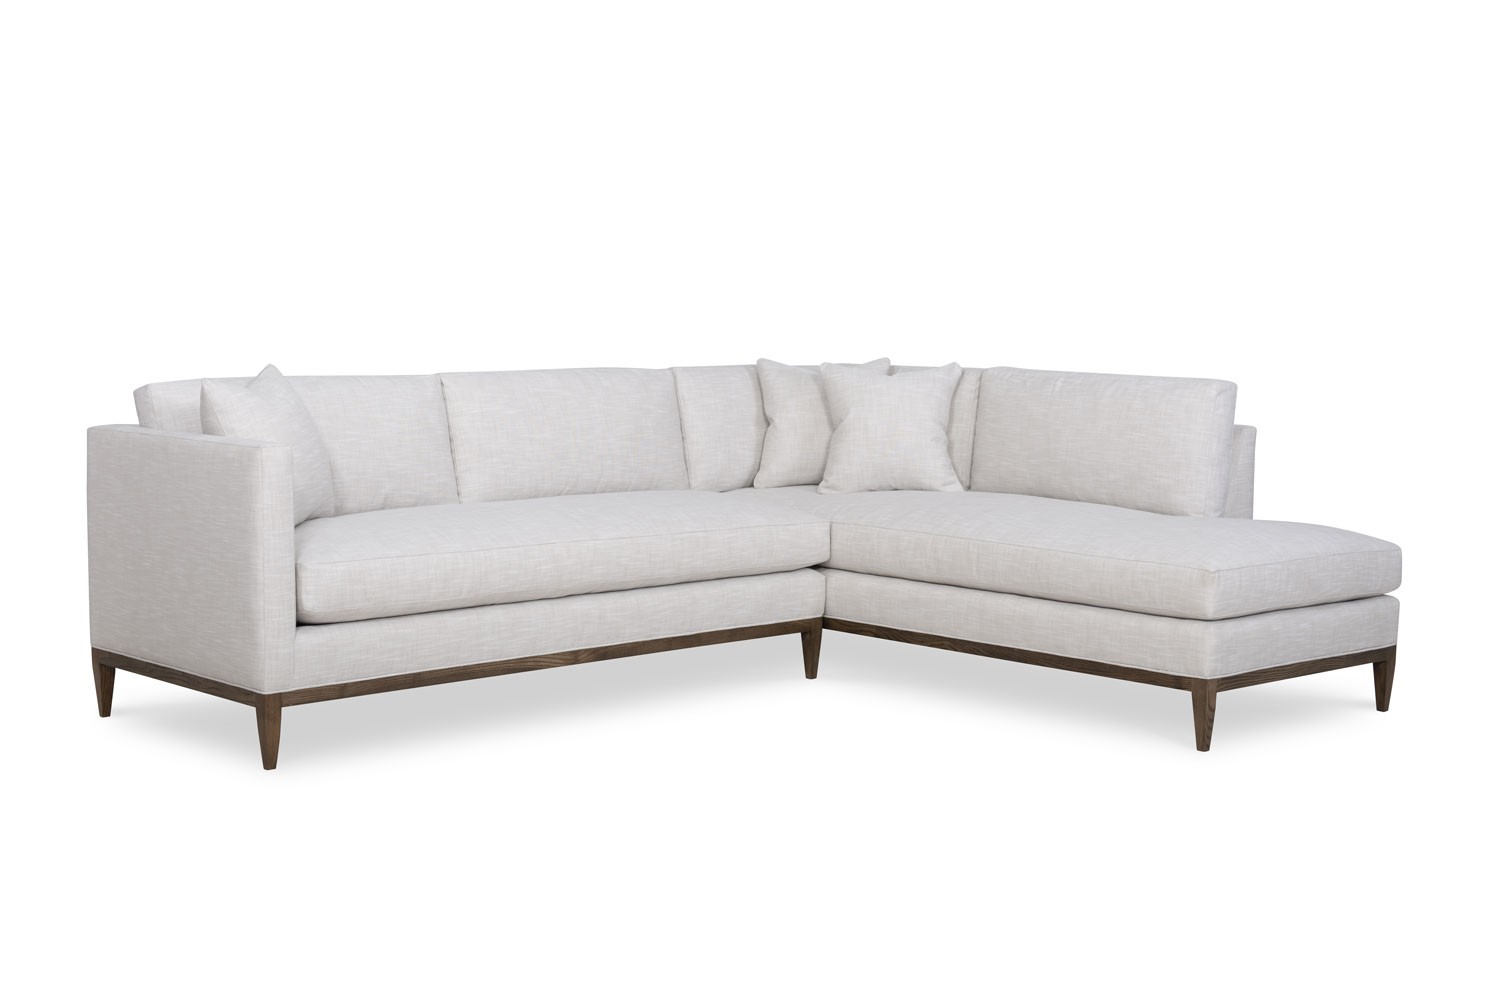 Wesley Hall 2560 Ashby Sectional